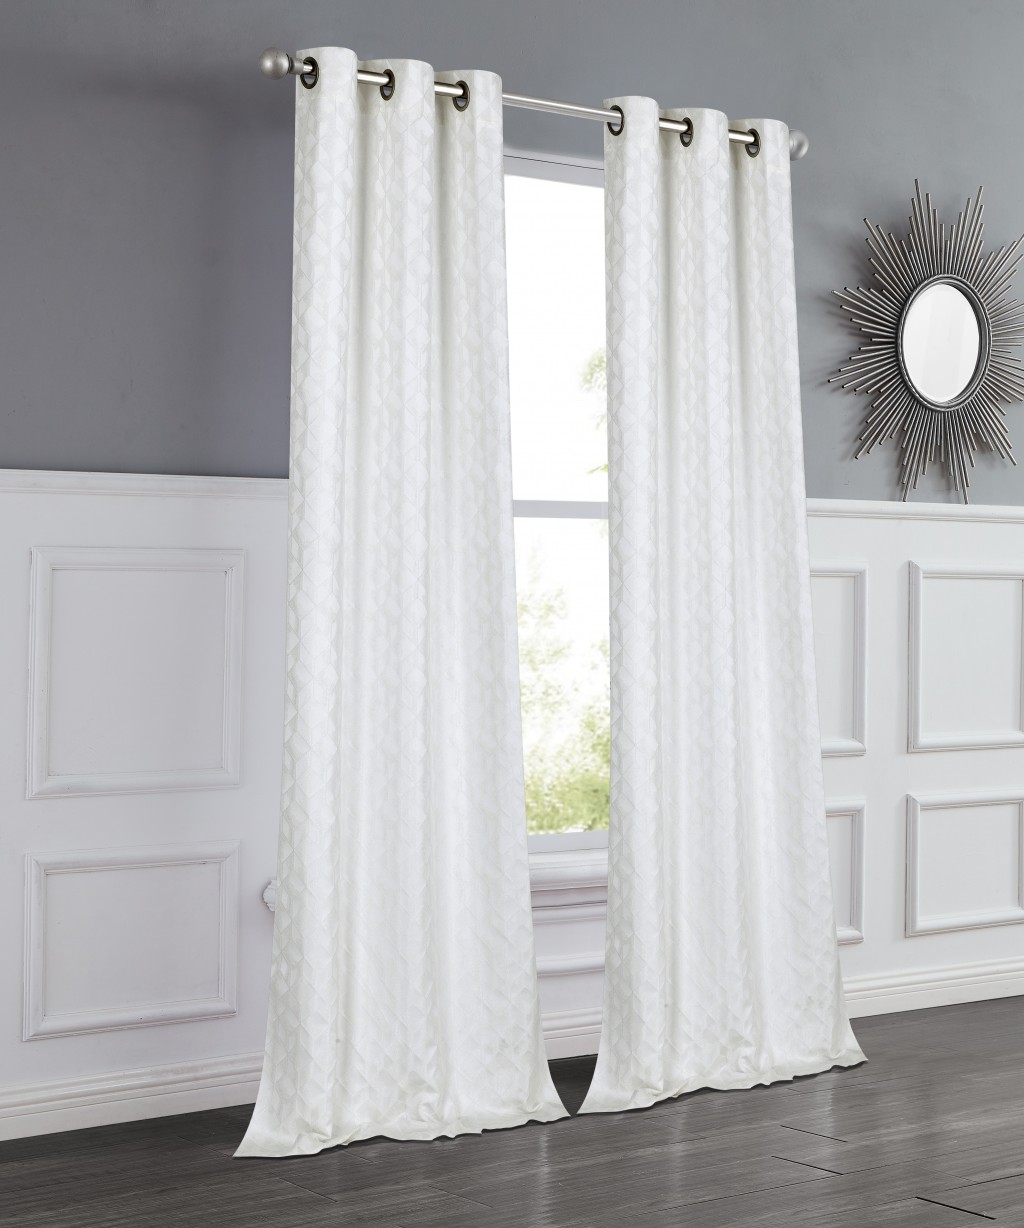 Set of Two 84" White Textured Window Curtain Panels